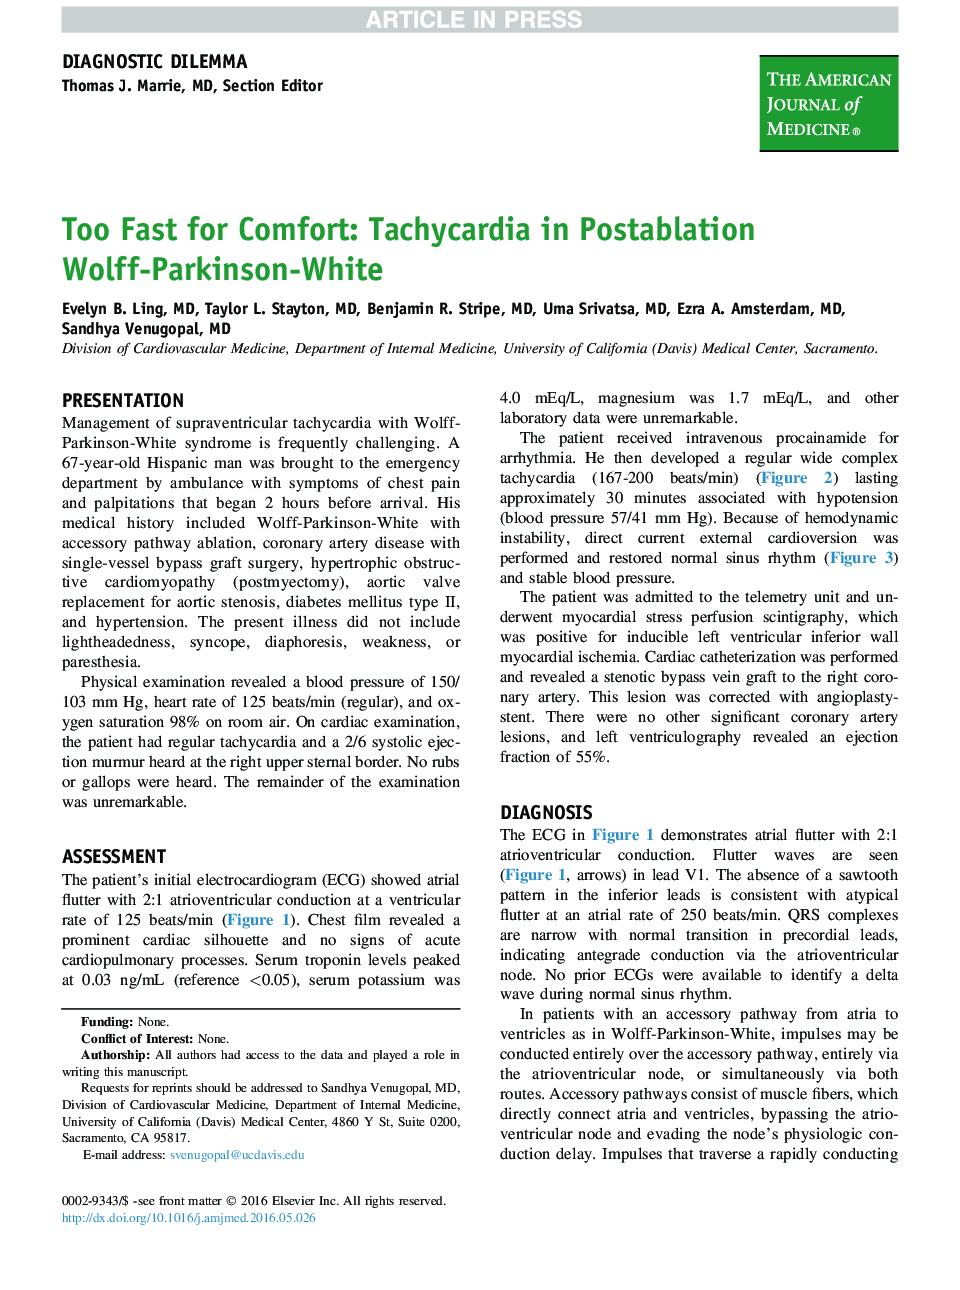 Too Fast for Comfort: Tachycardia in Postablation Wolff-Parkinson-White